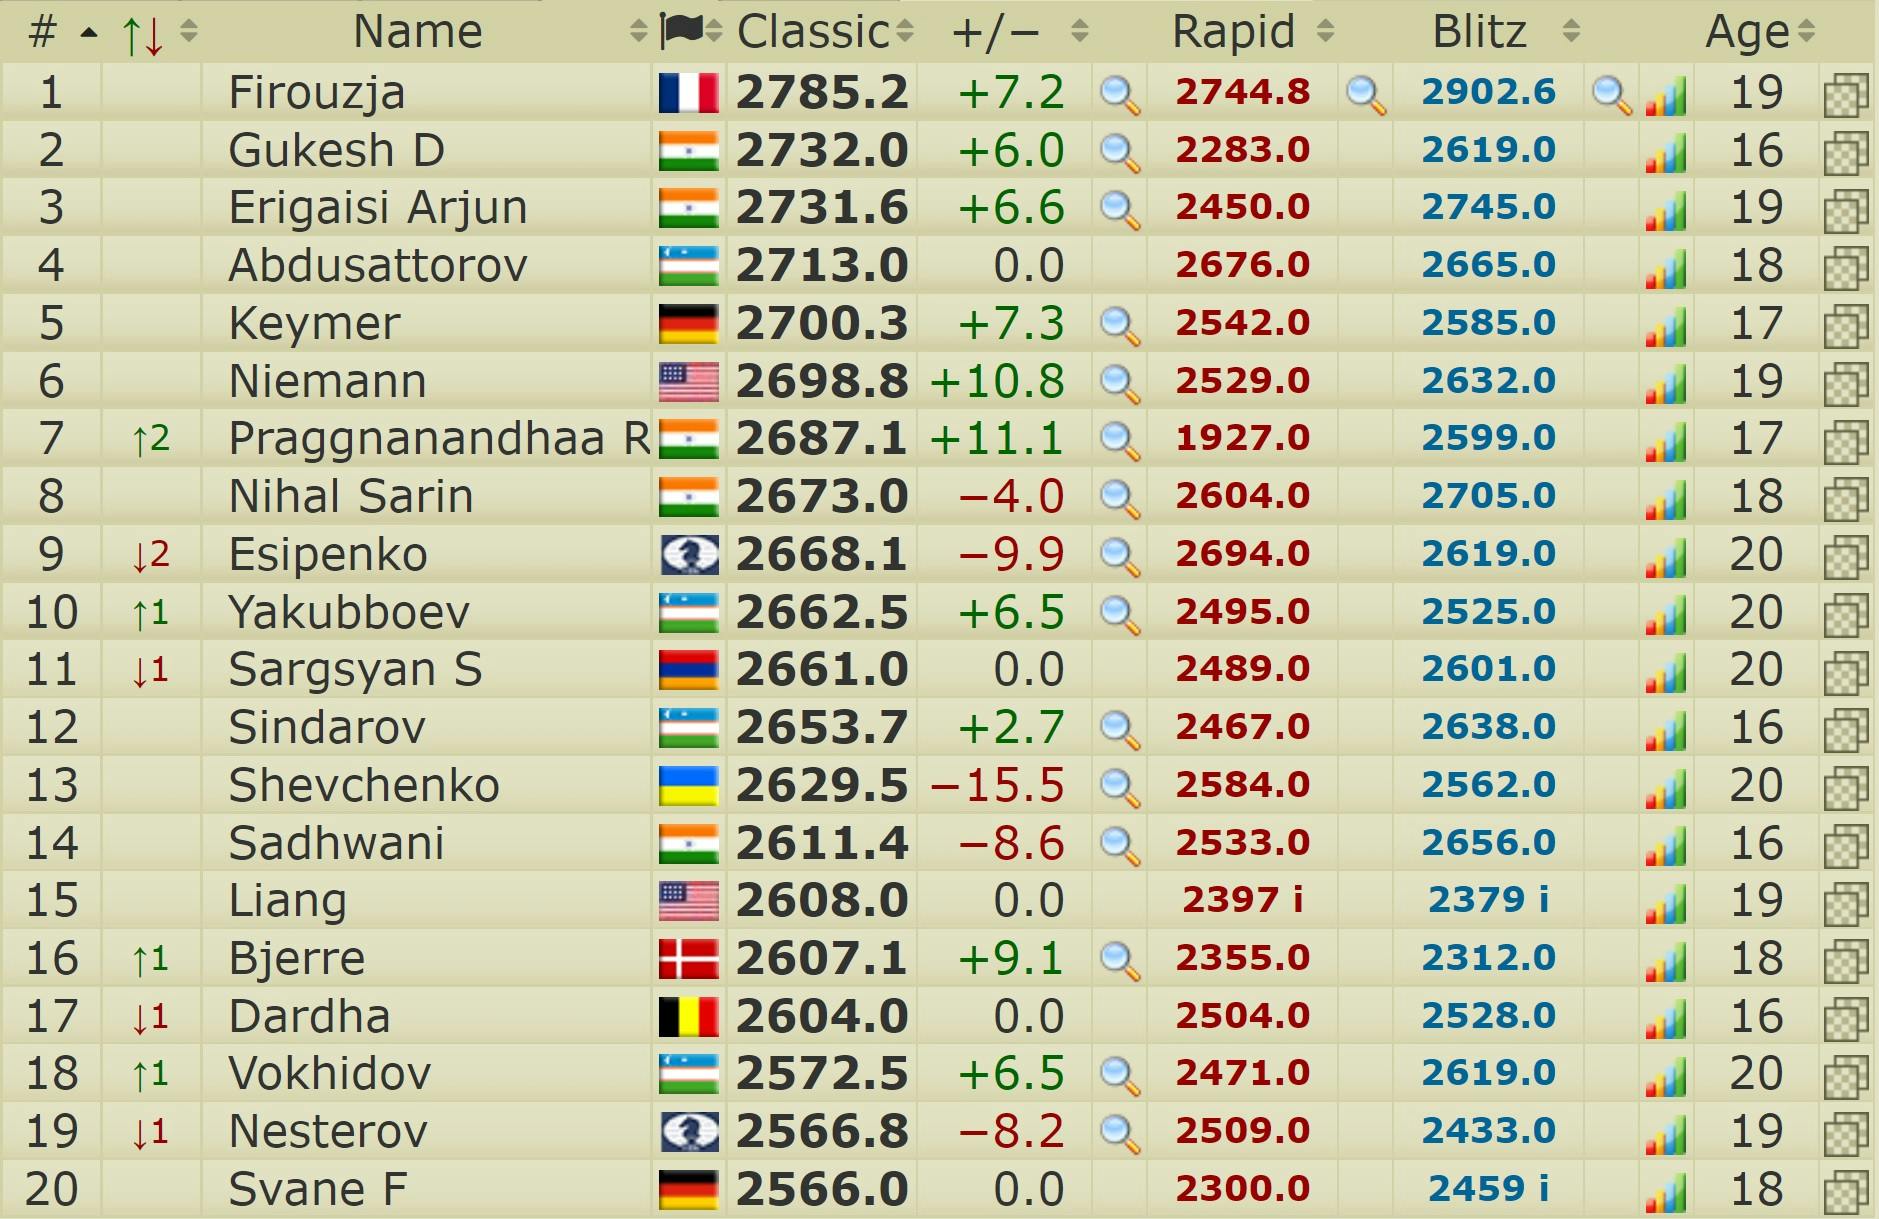 new.2700chess.com - Live Chess Ratings - 2700chess - New 2700 Chess